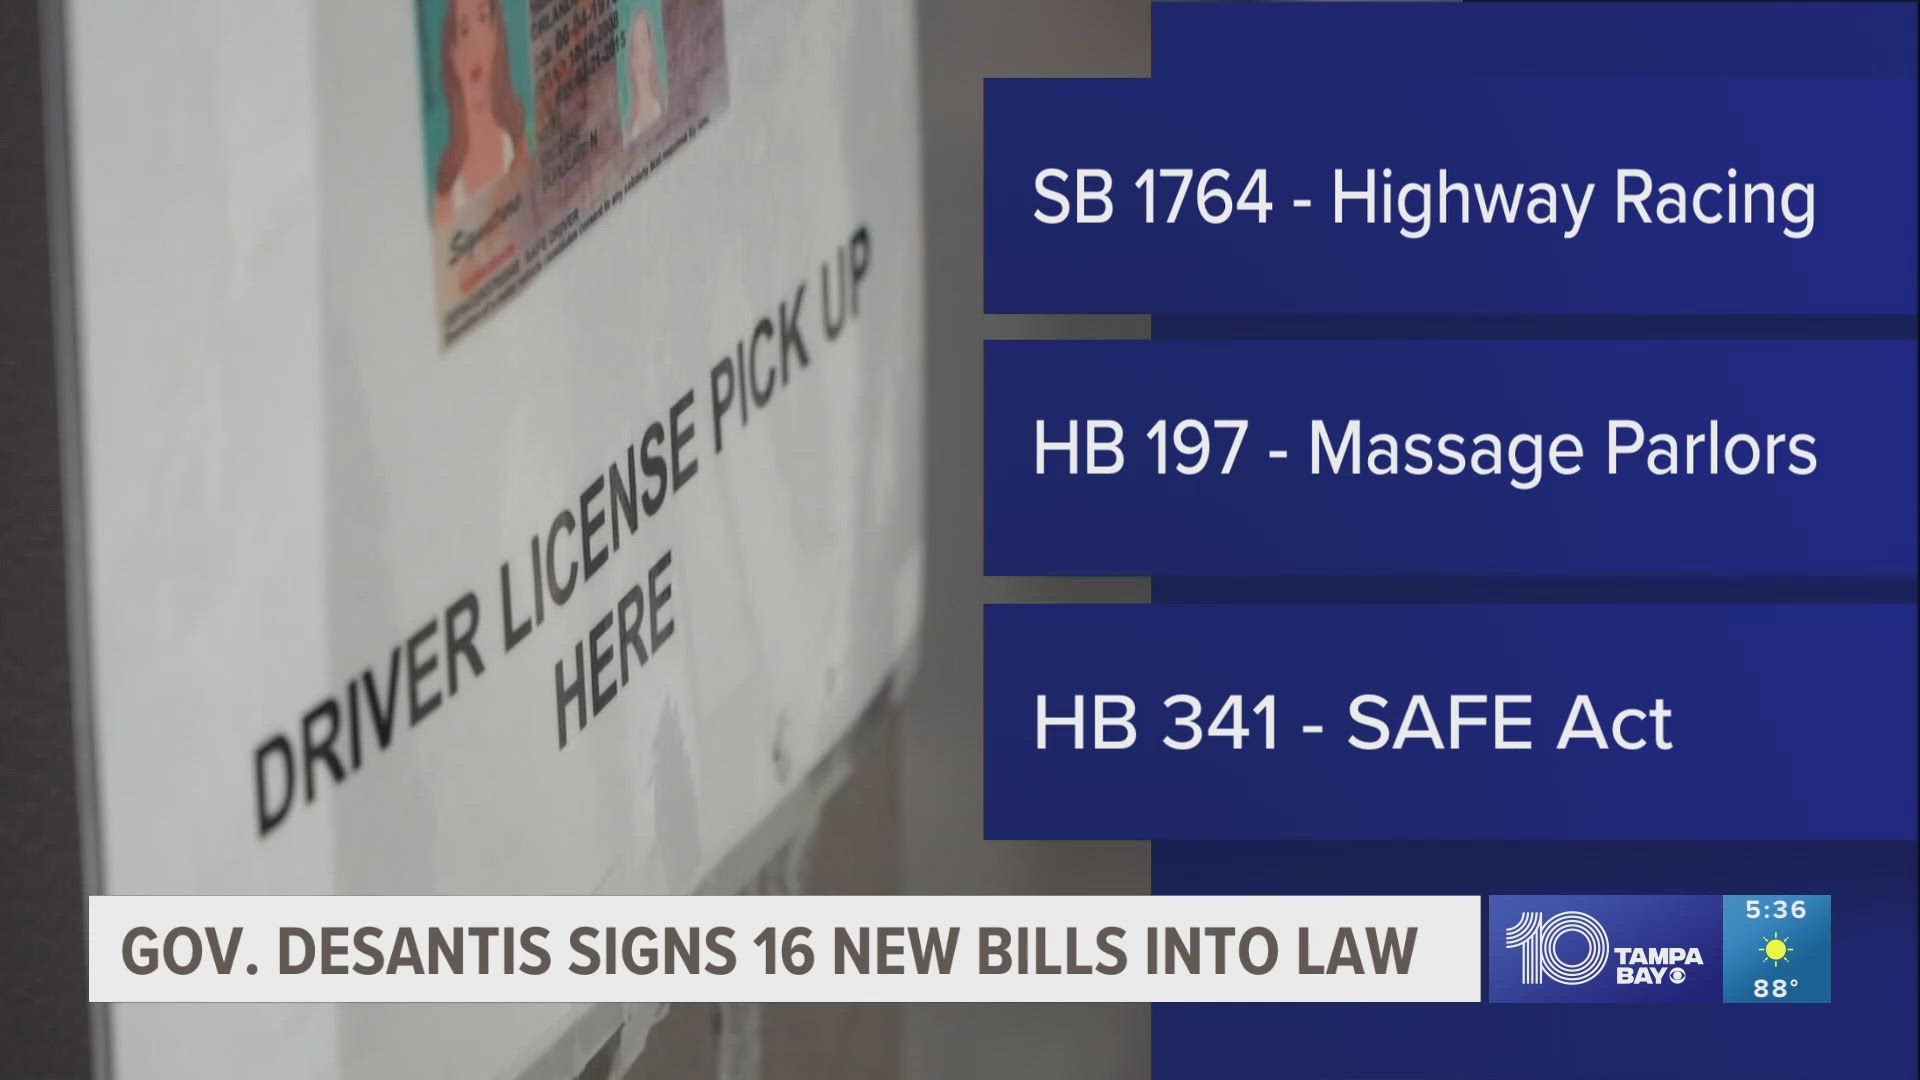 Governor Ron DeSantis has signed another round of bills this week, covering a variety of topics.